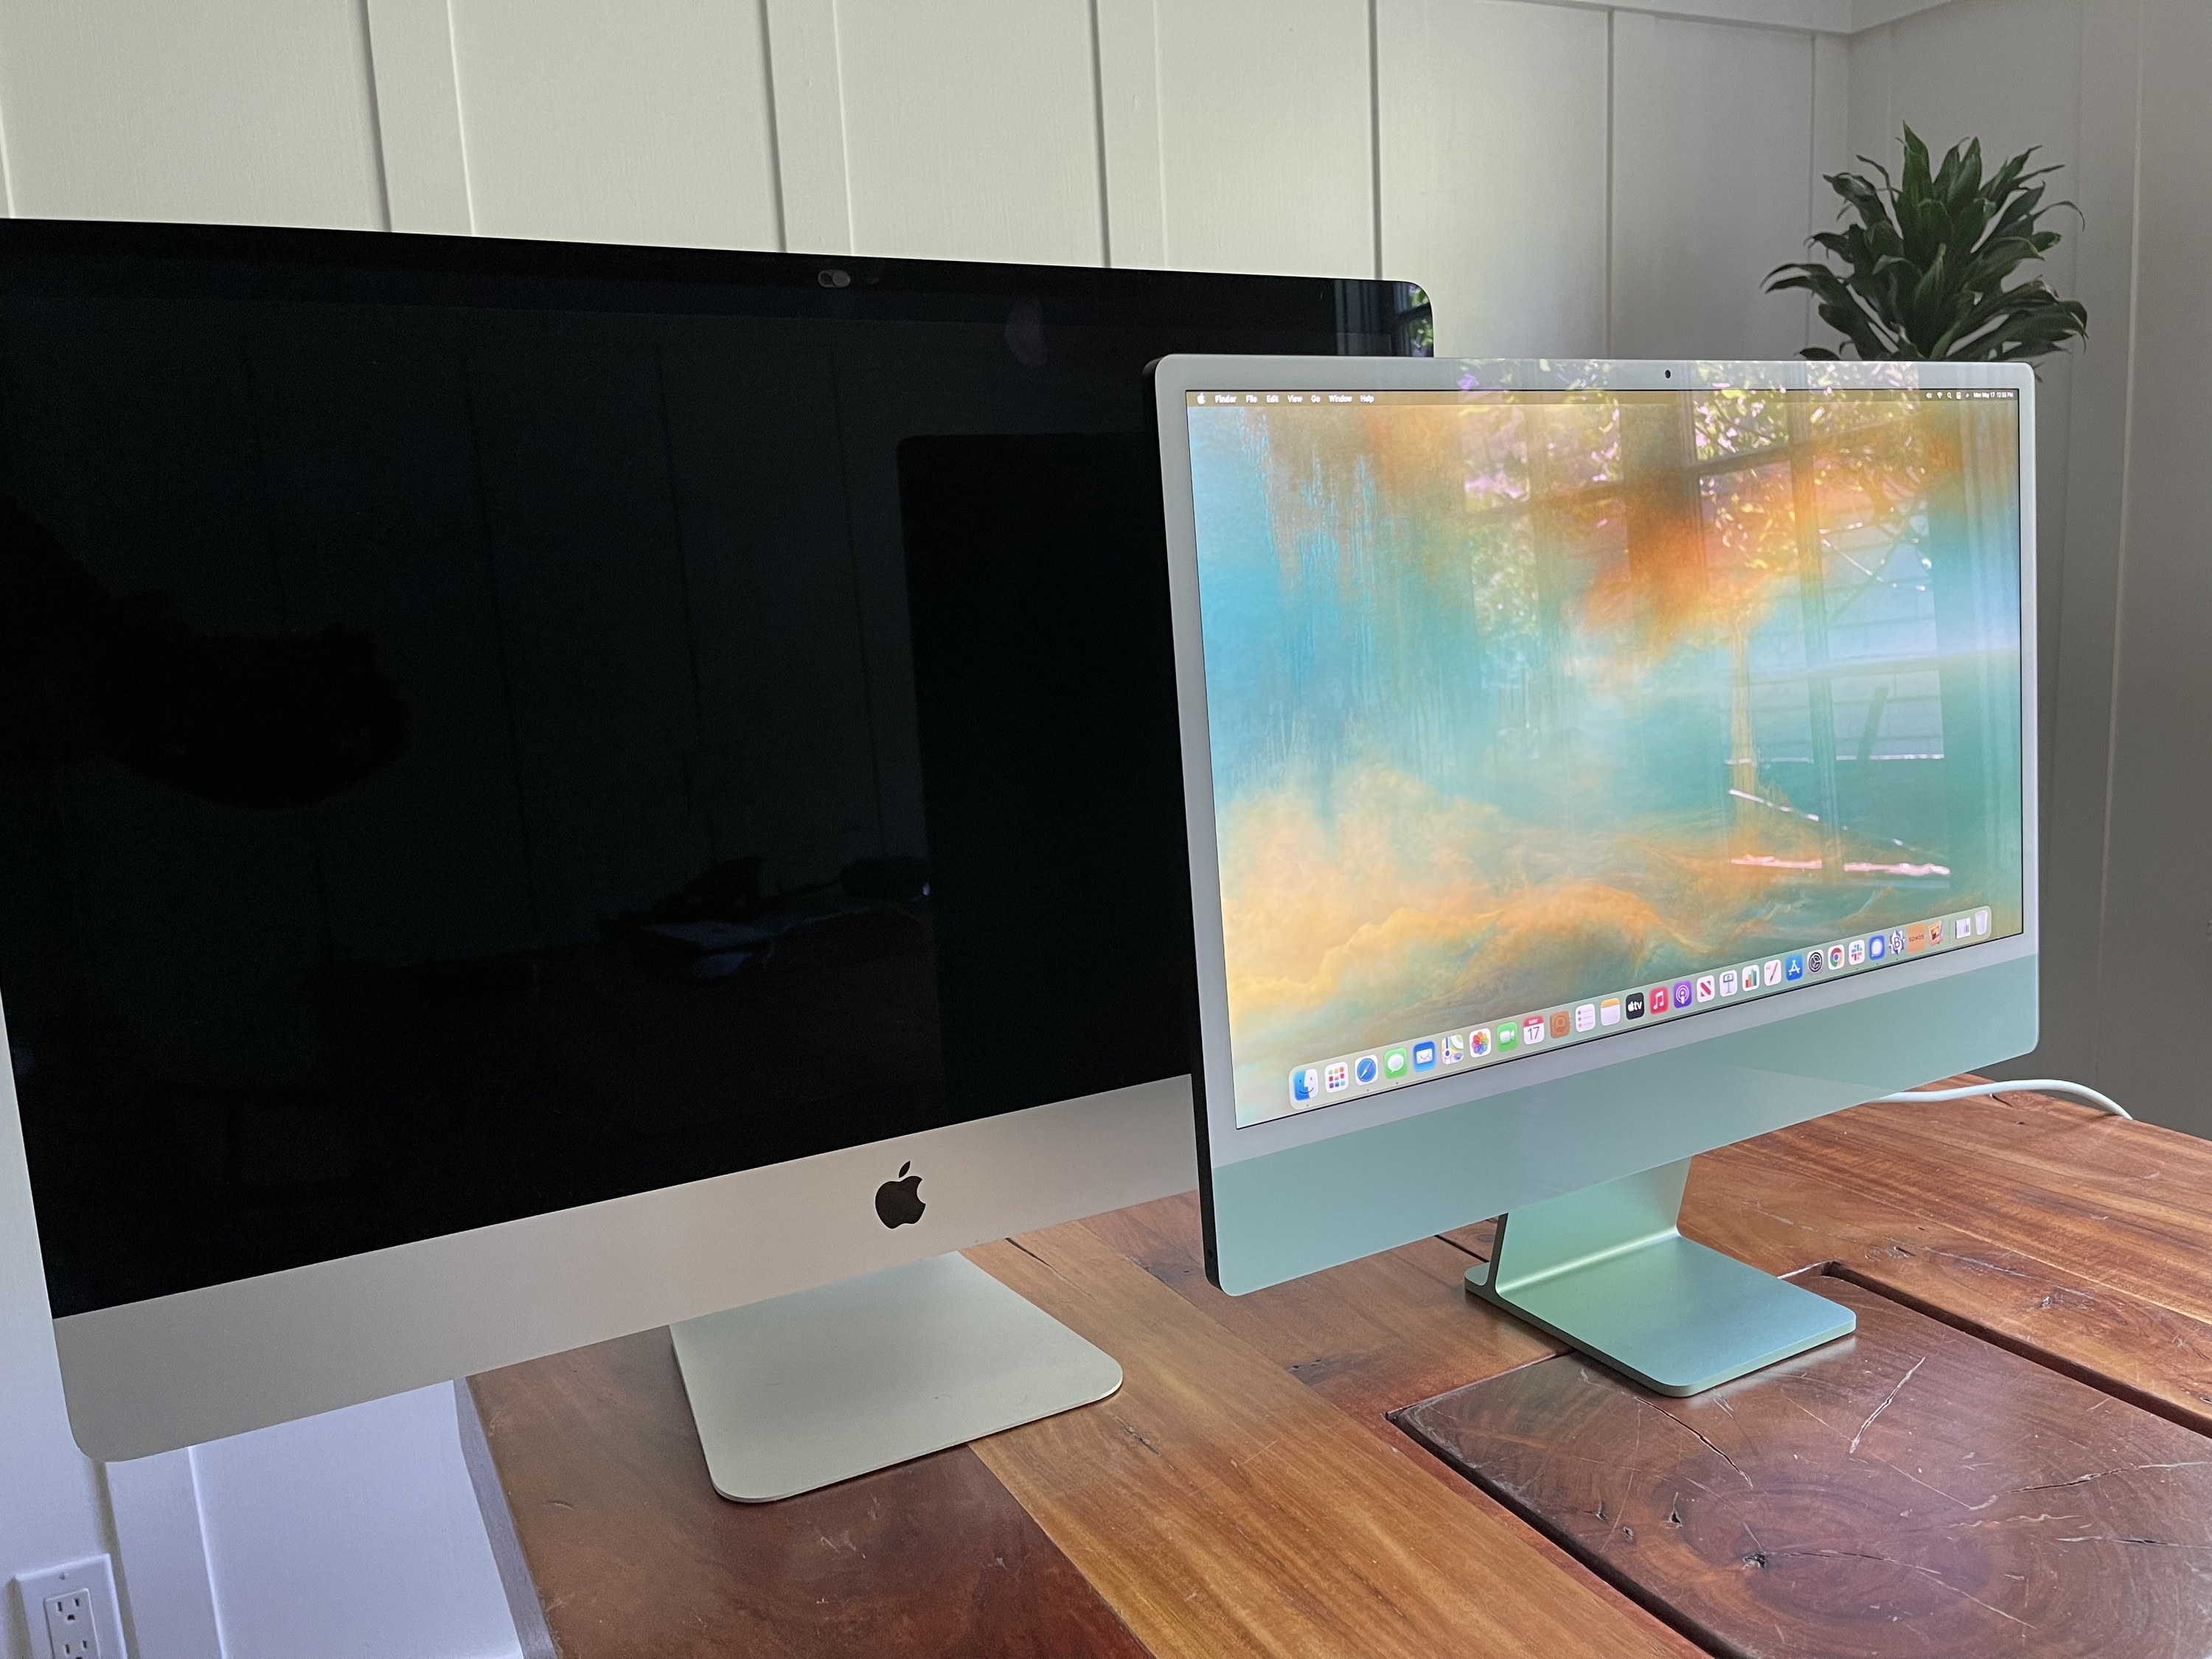 release of new imac 2018